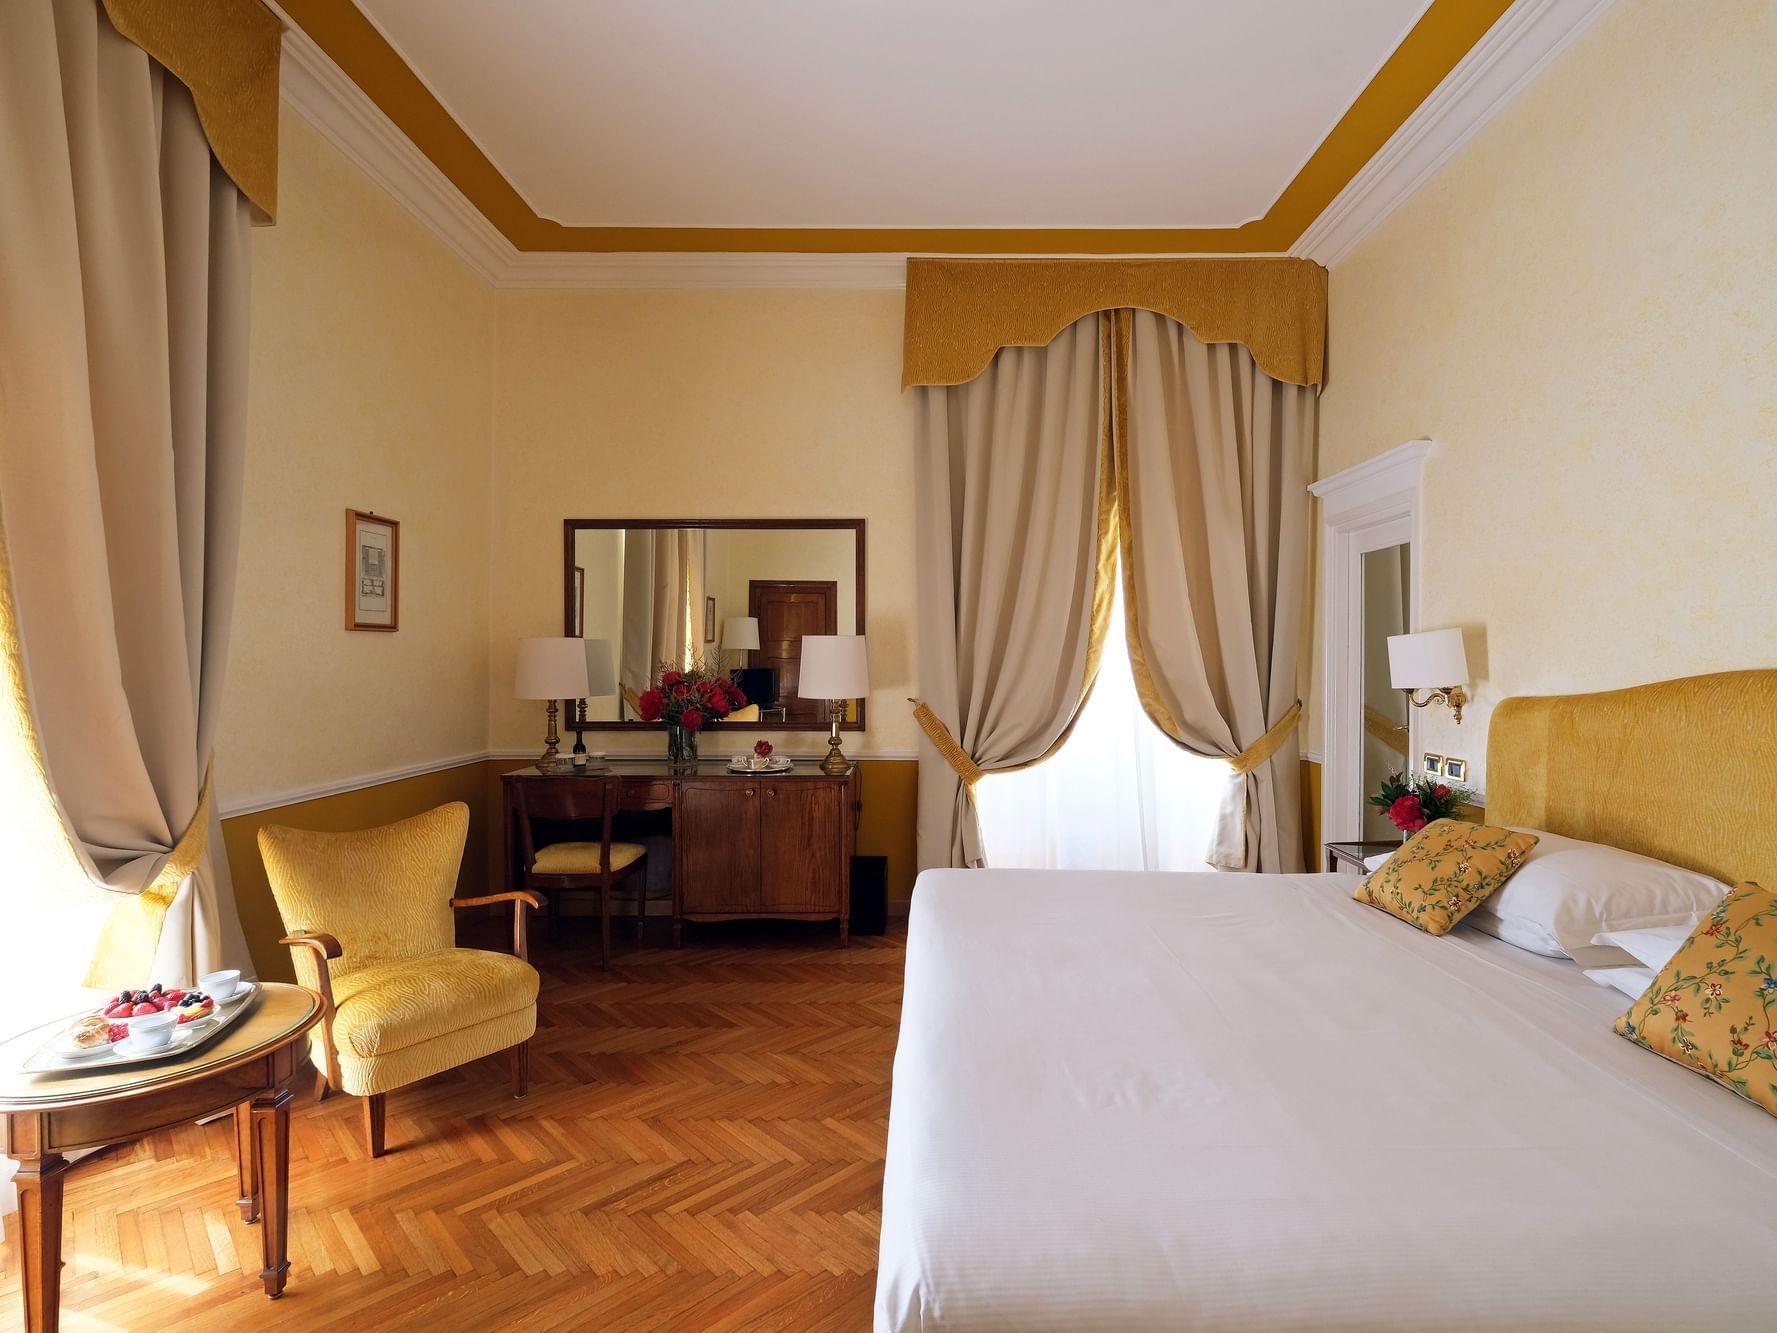 Cozy bed, Mirror and coffee table in Suites at Bettoja Hotel Mediterraneo